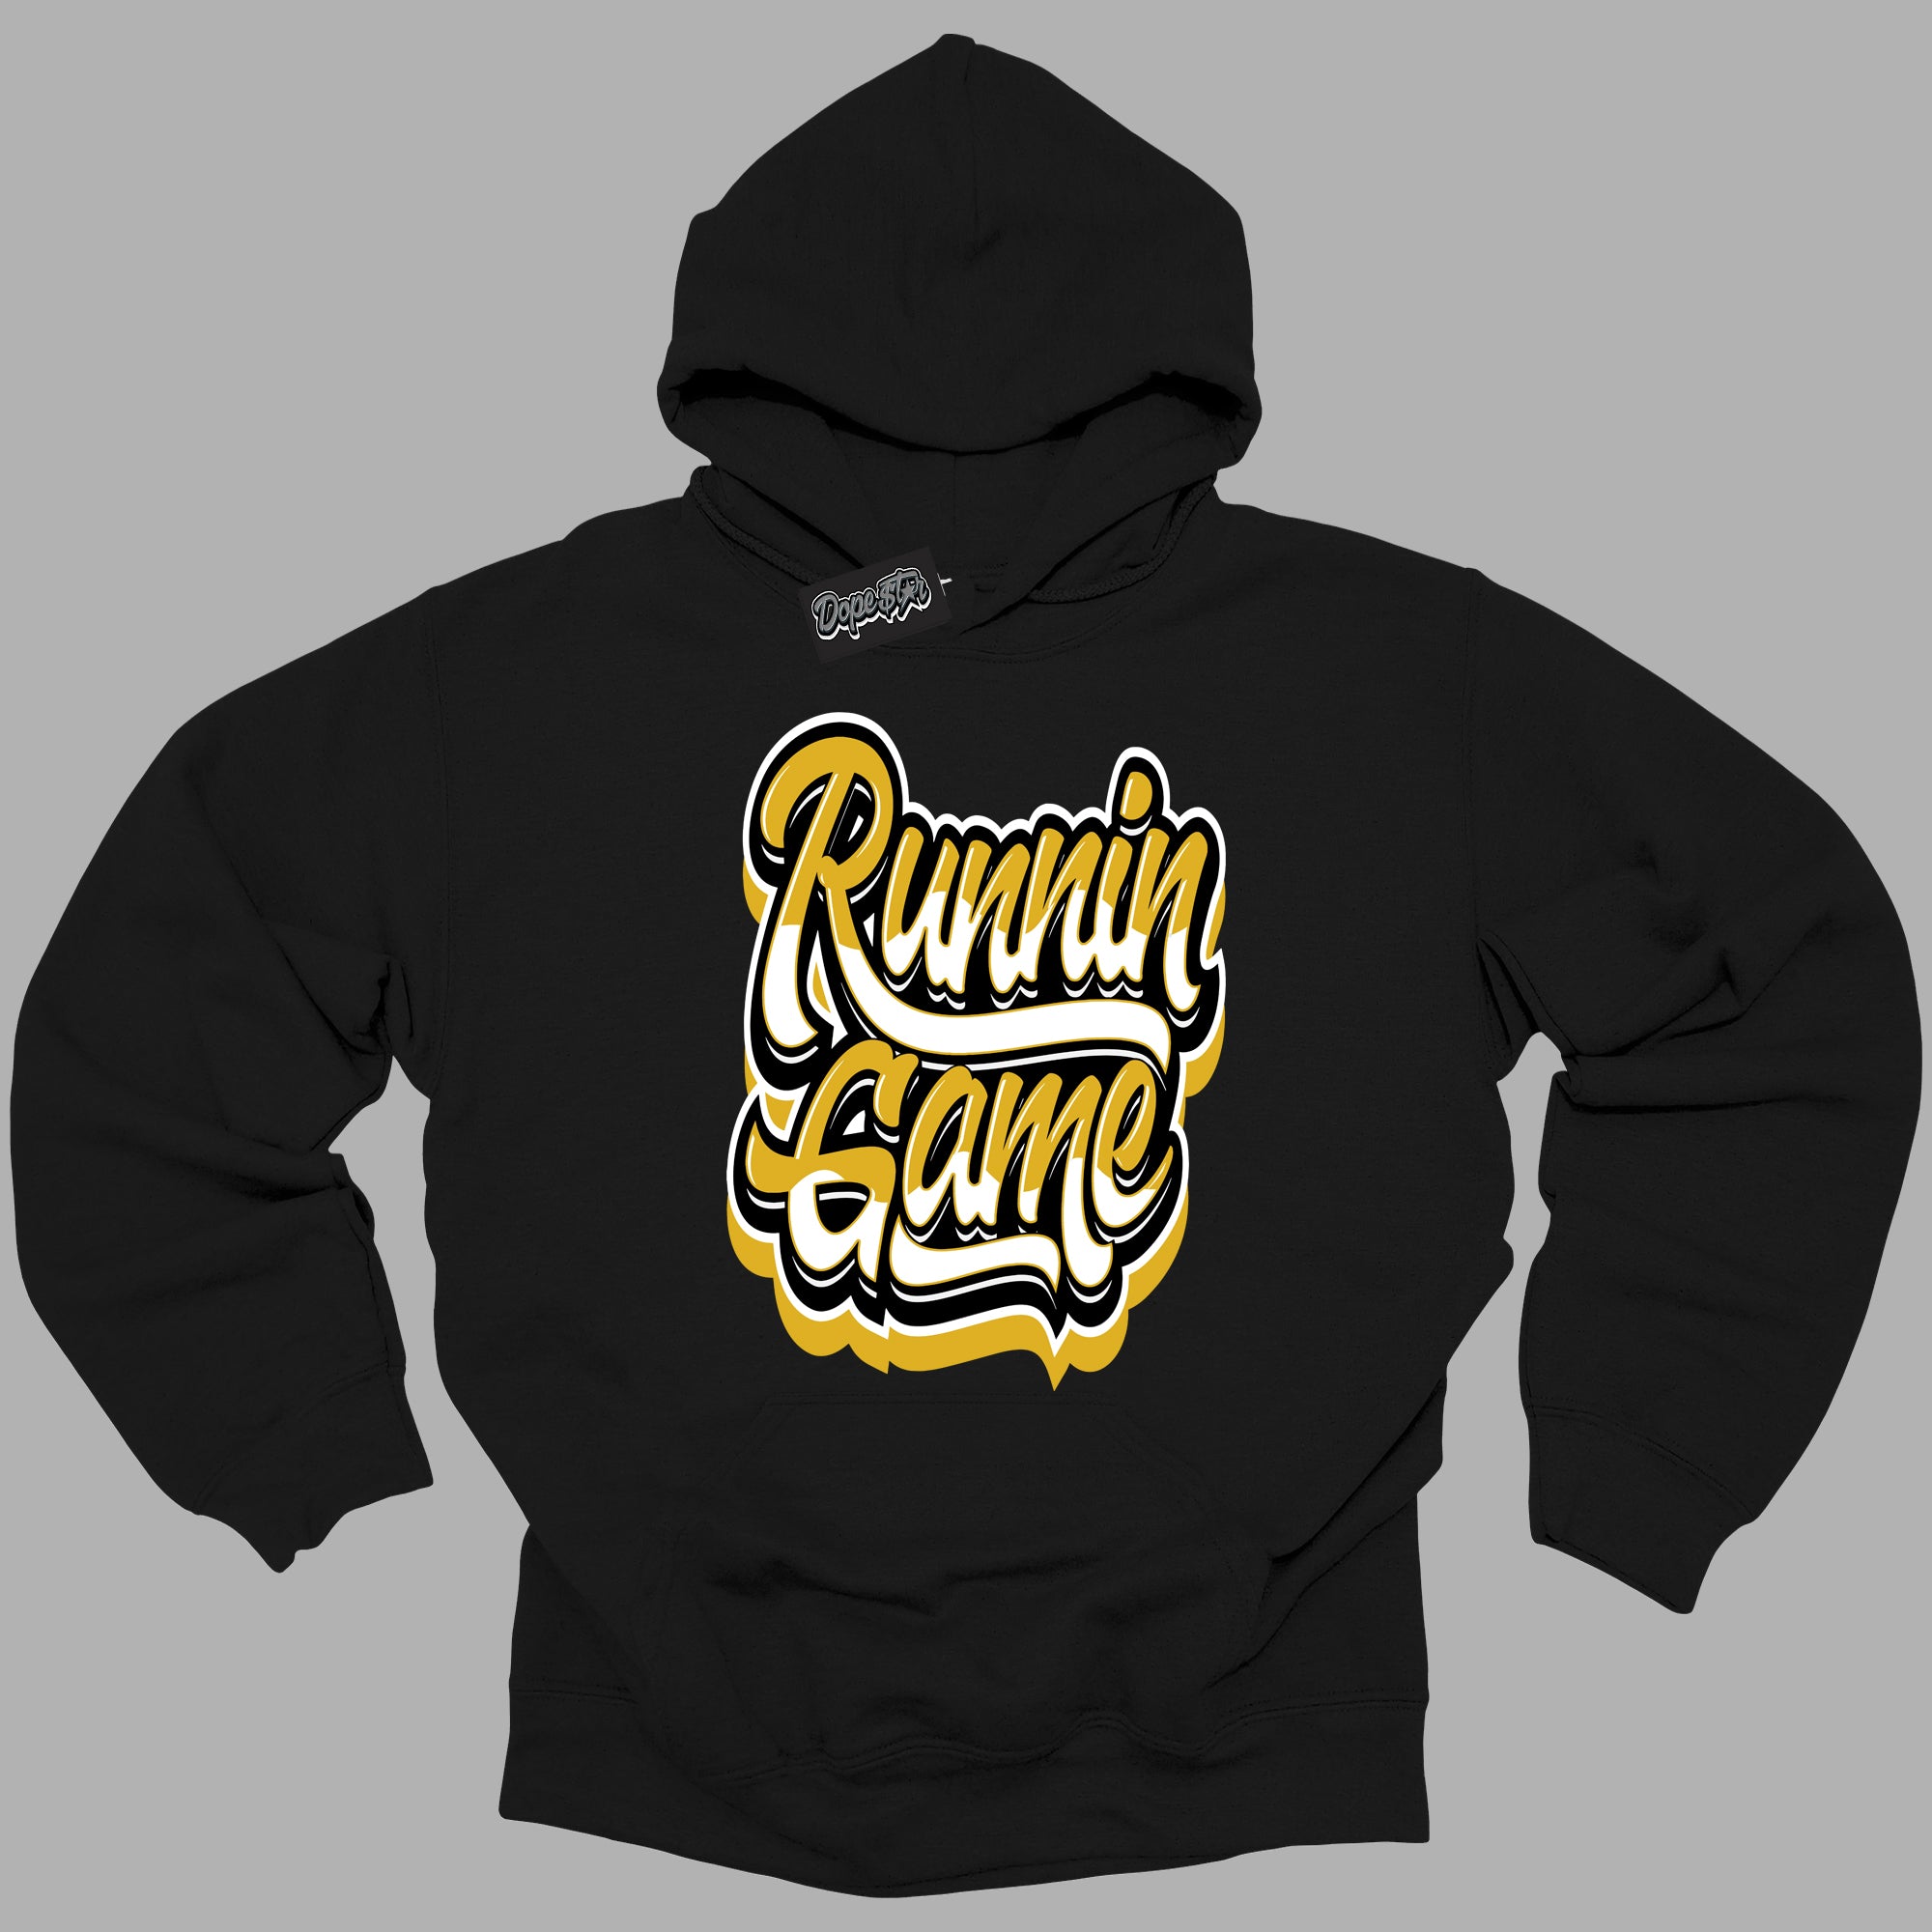 Cool Black Hoodie with “ Running Game ”  design that Perfectly Matches Yellow Ochre 6s Sneakers.